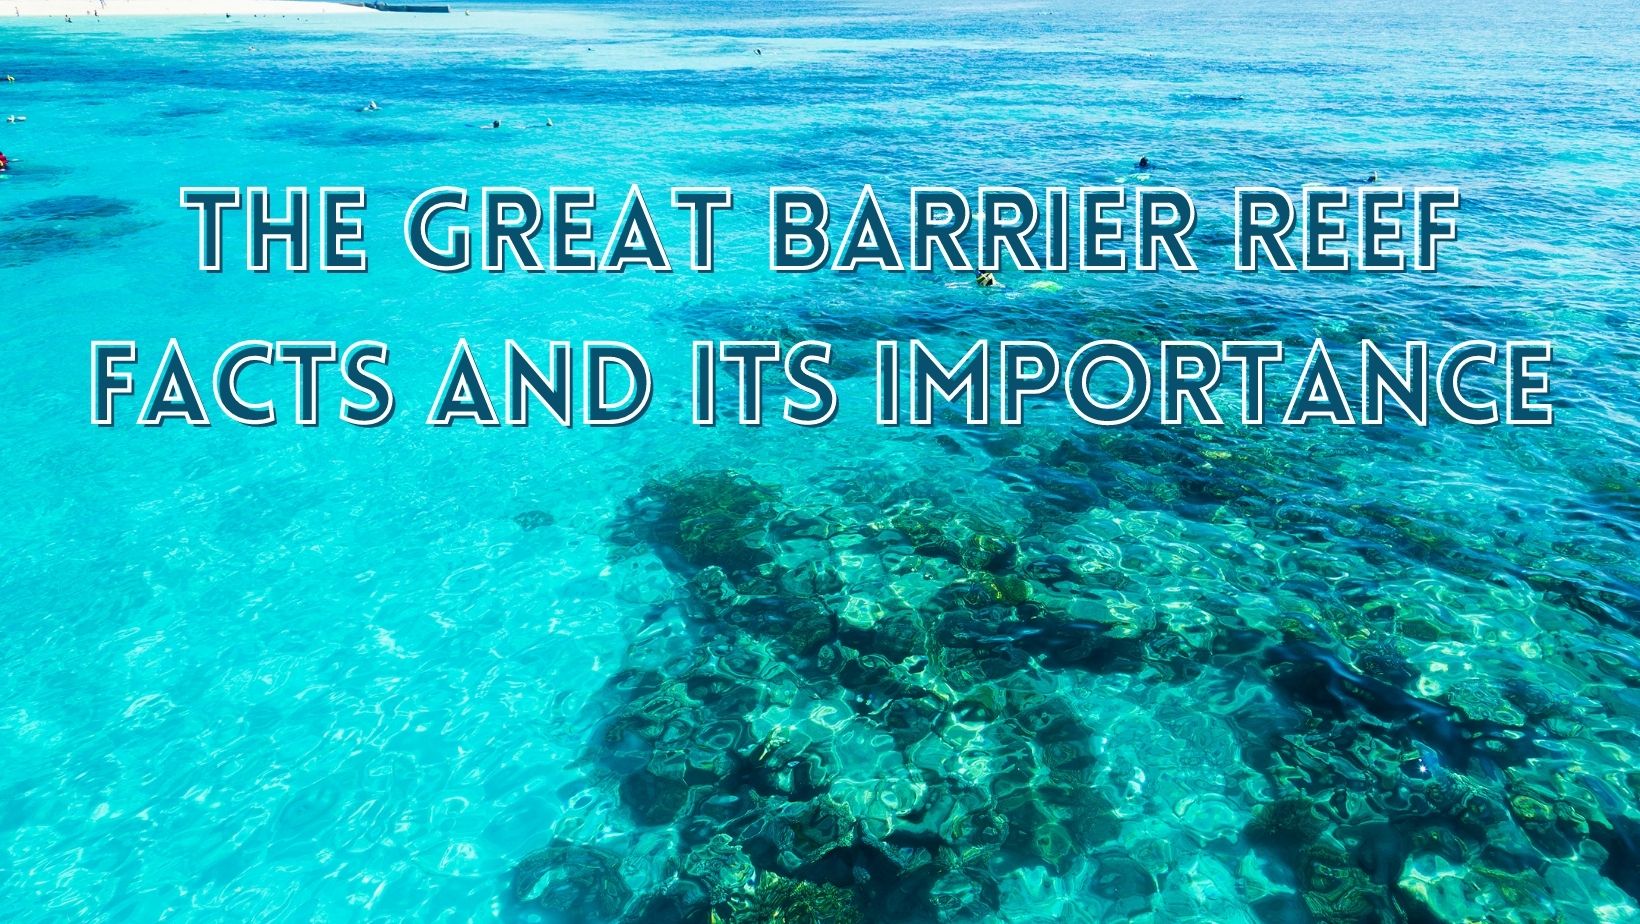 Great barrier reef facts and importance